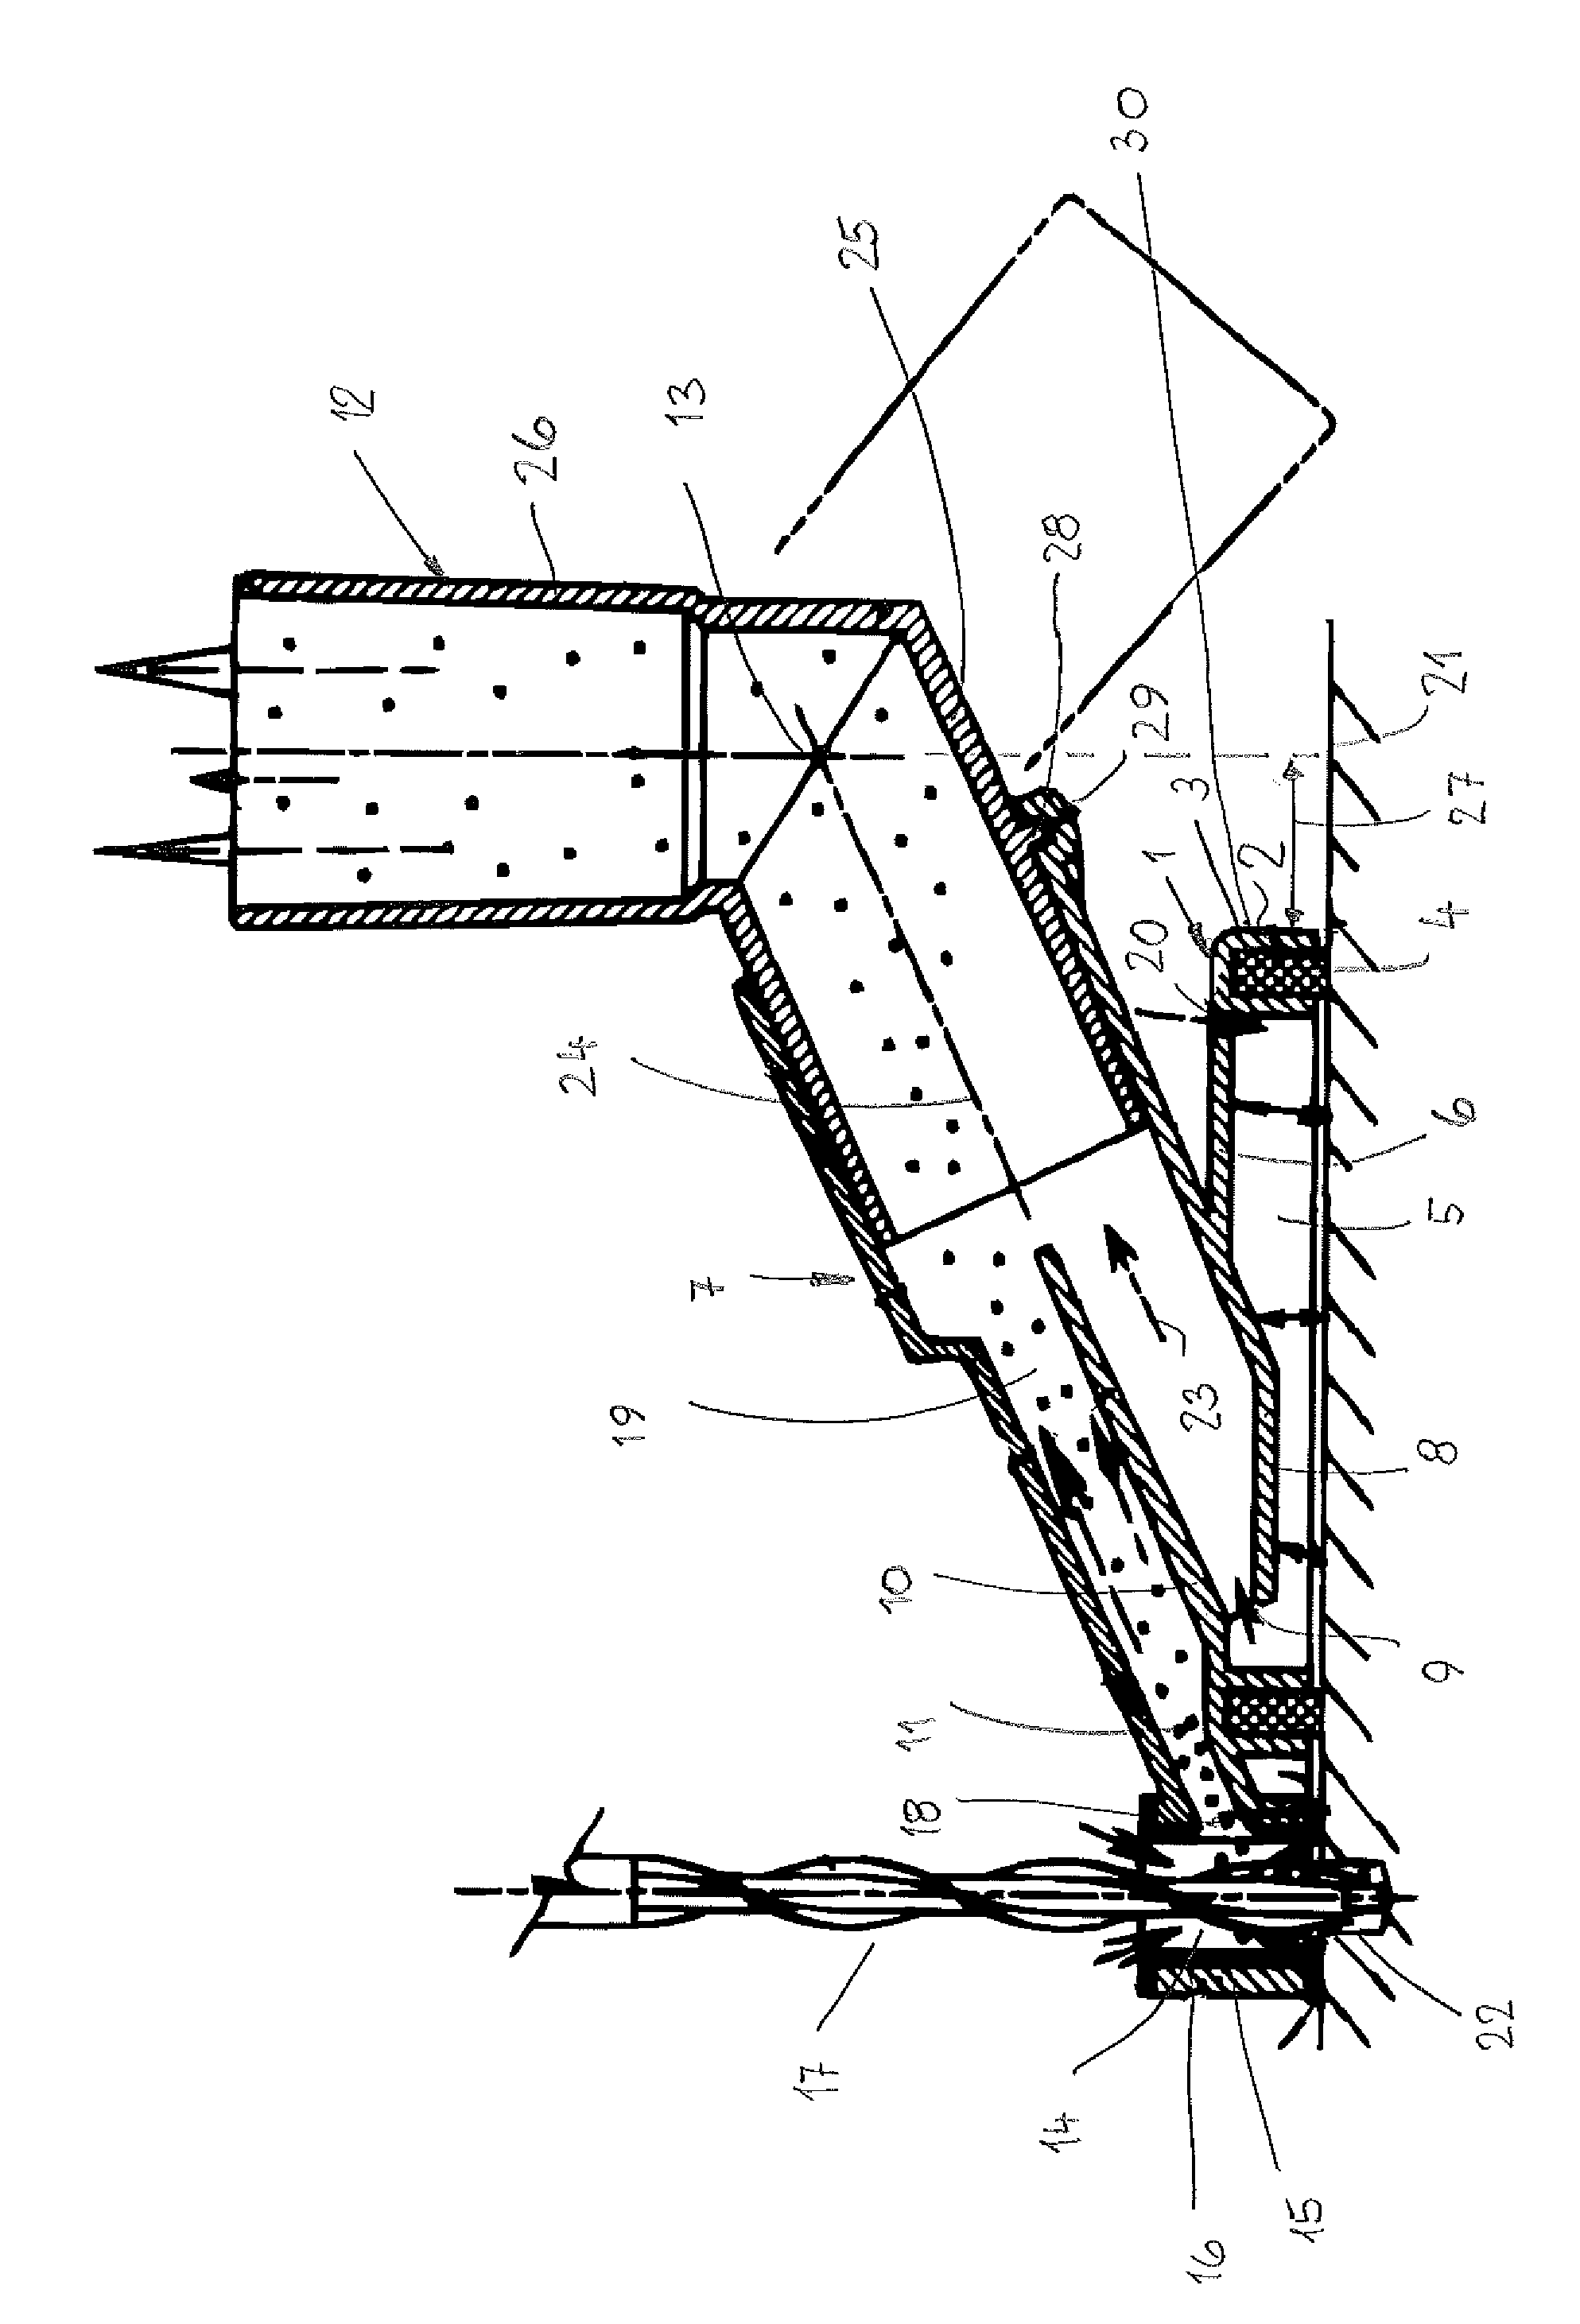 Device for removing by suction drill dust when drilling holes into walls